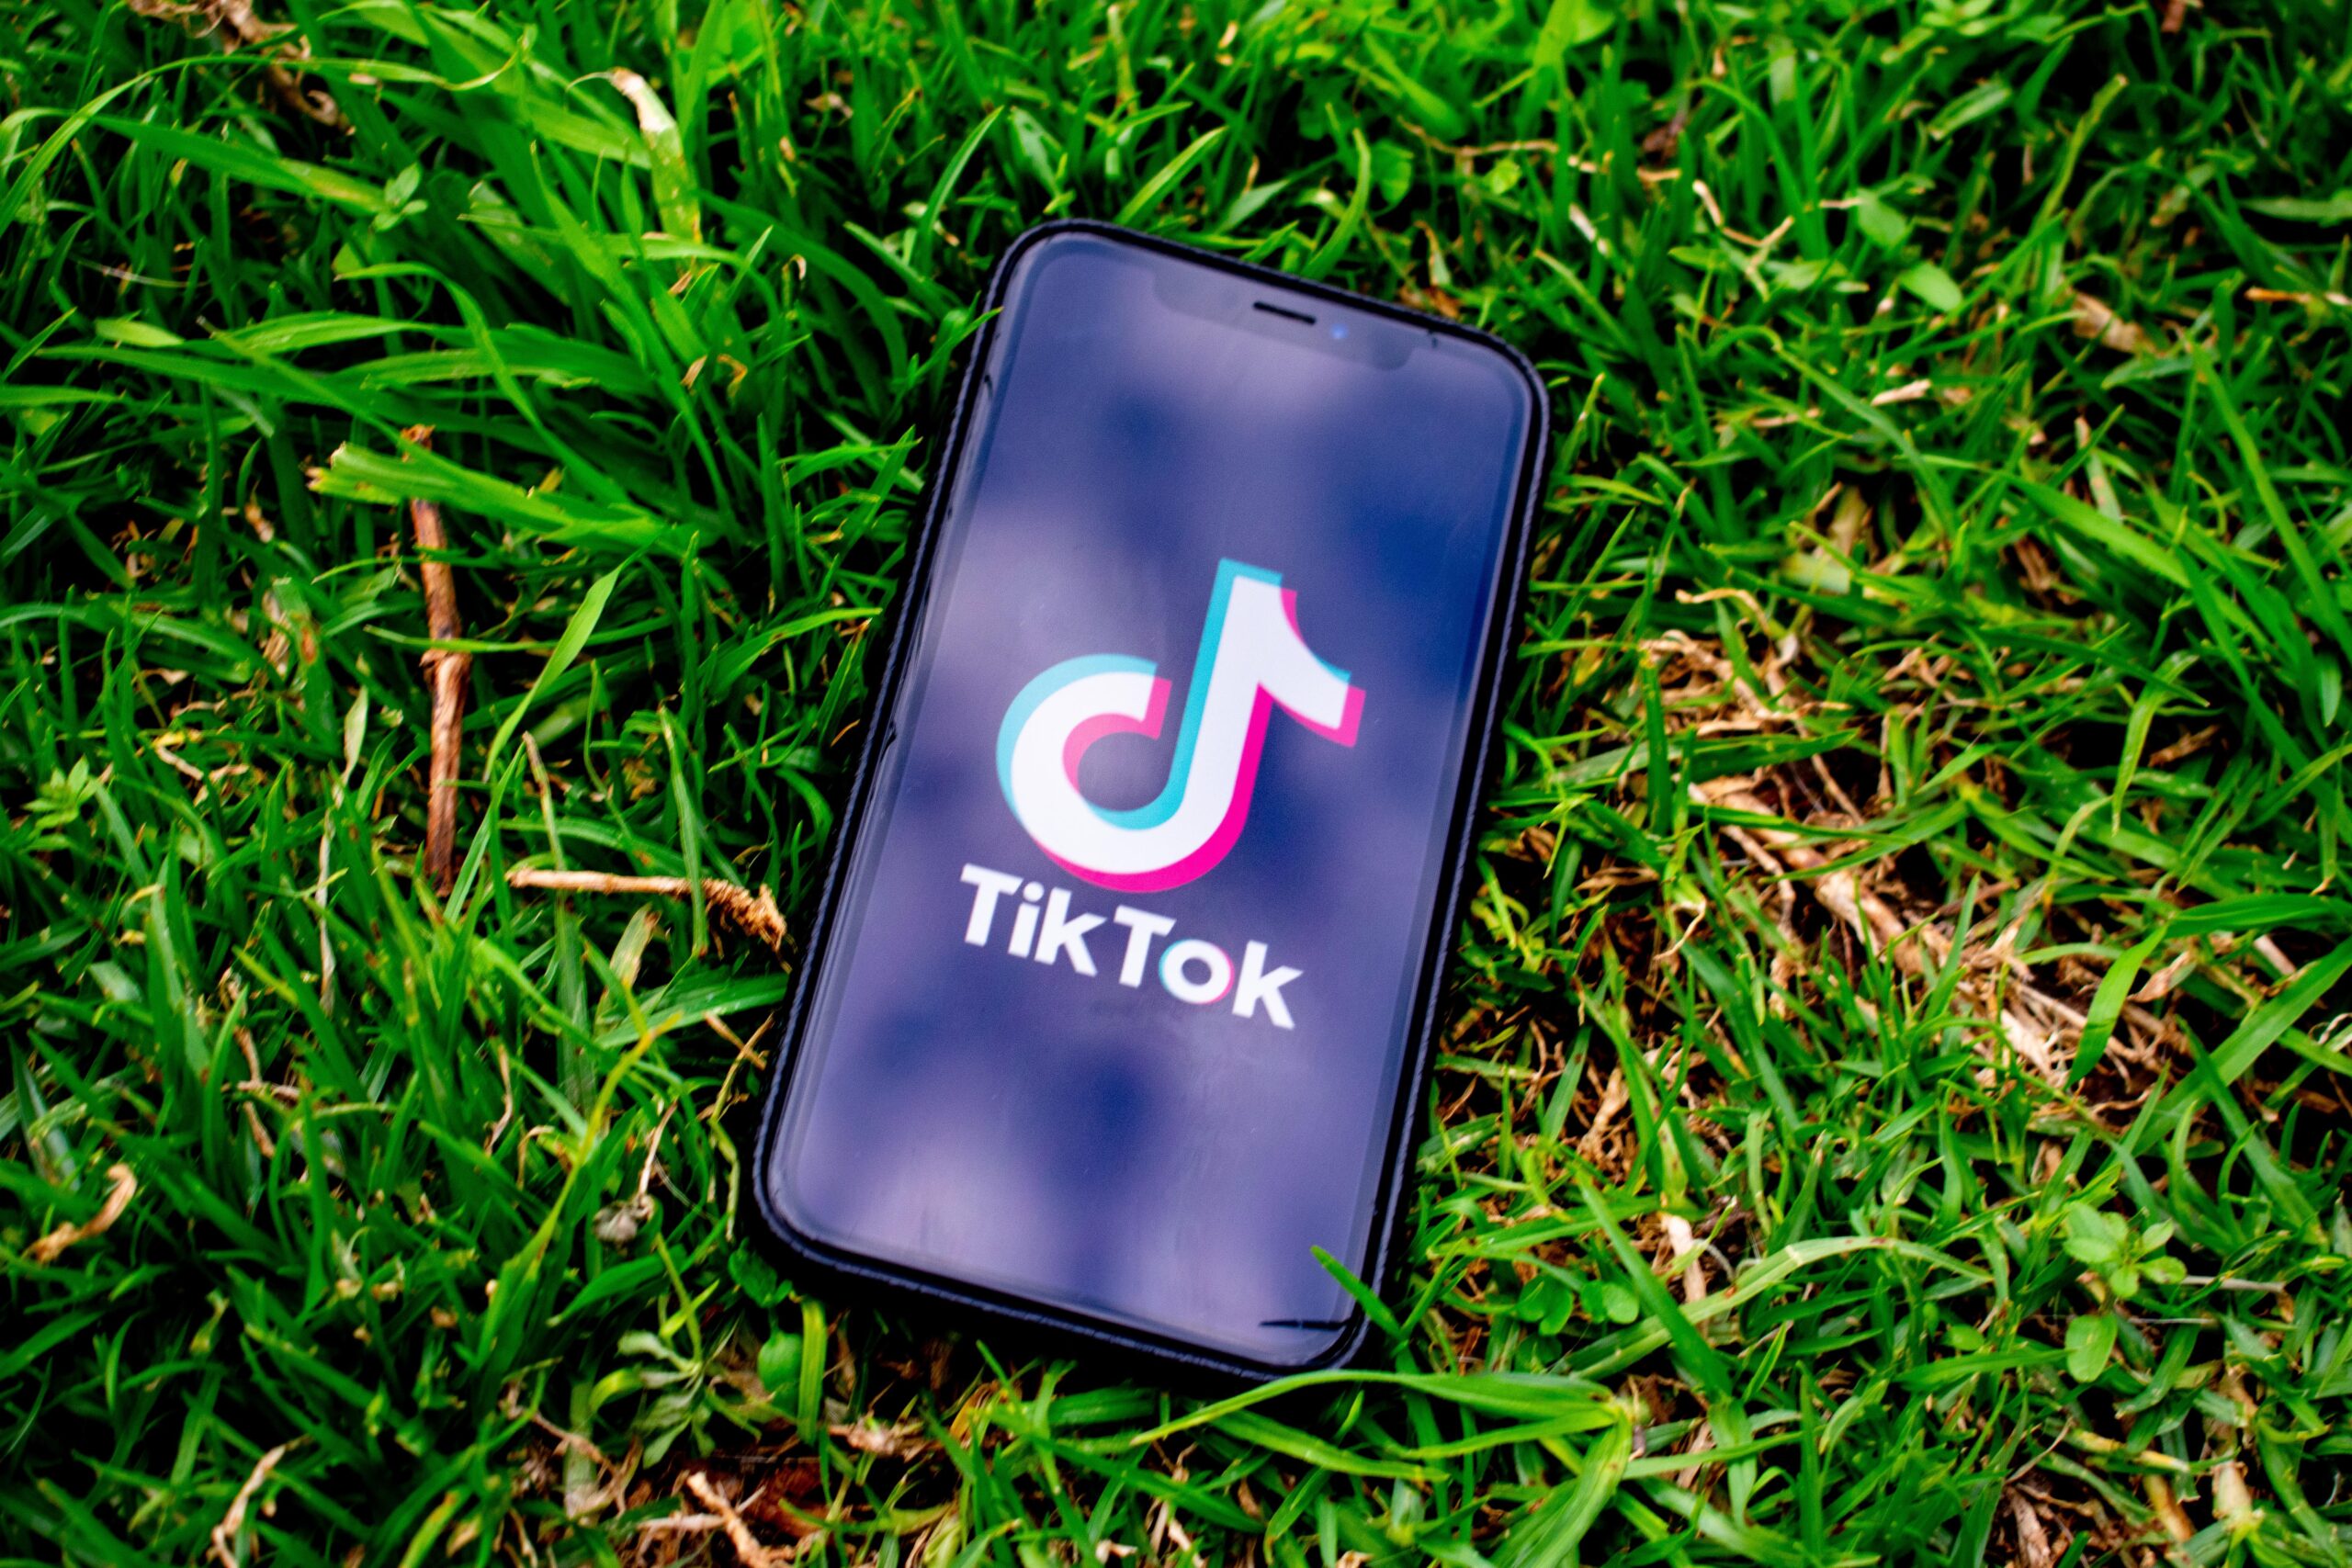 viral on TikTok with how many views